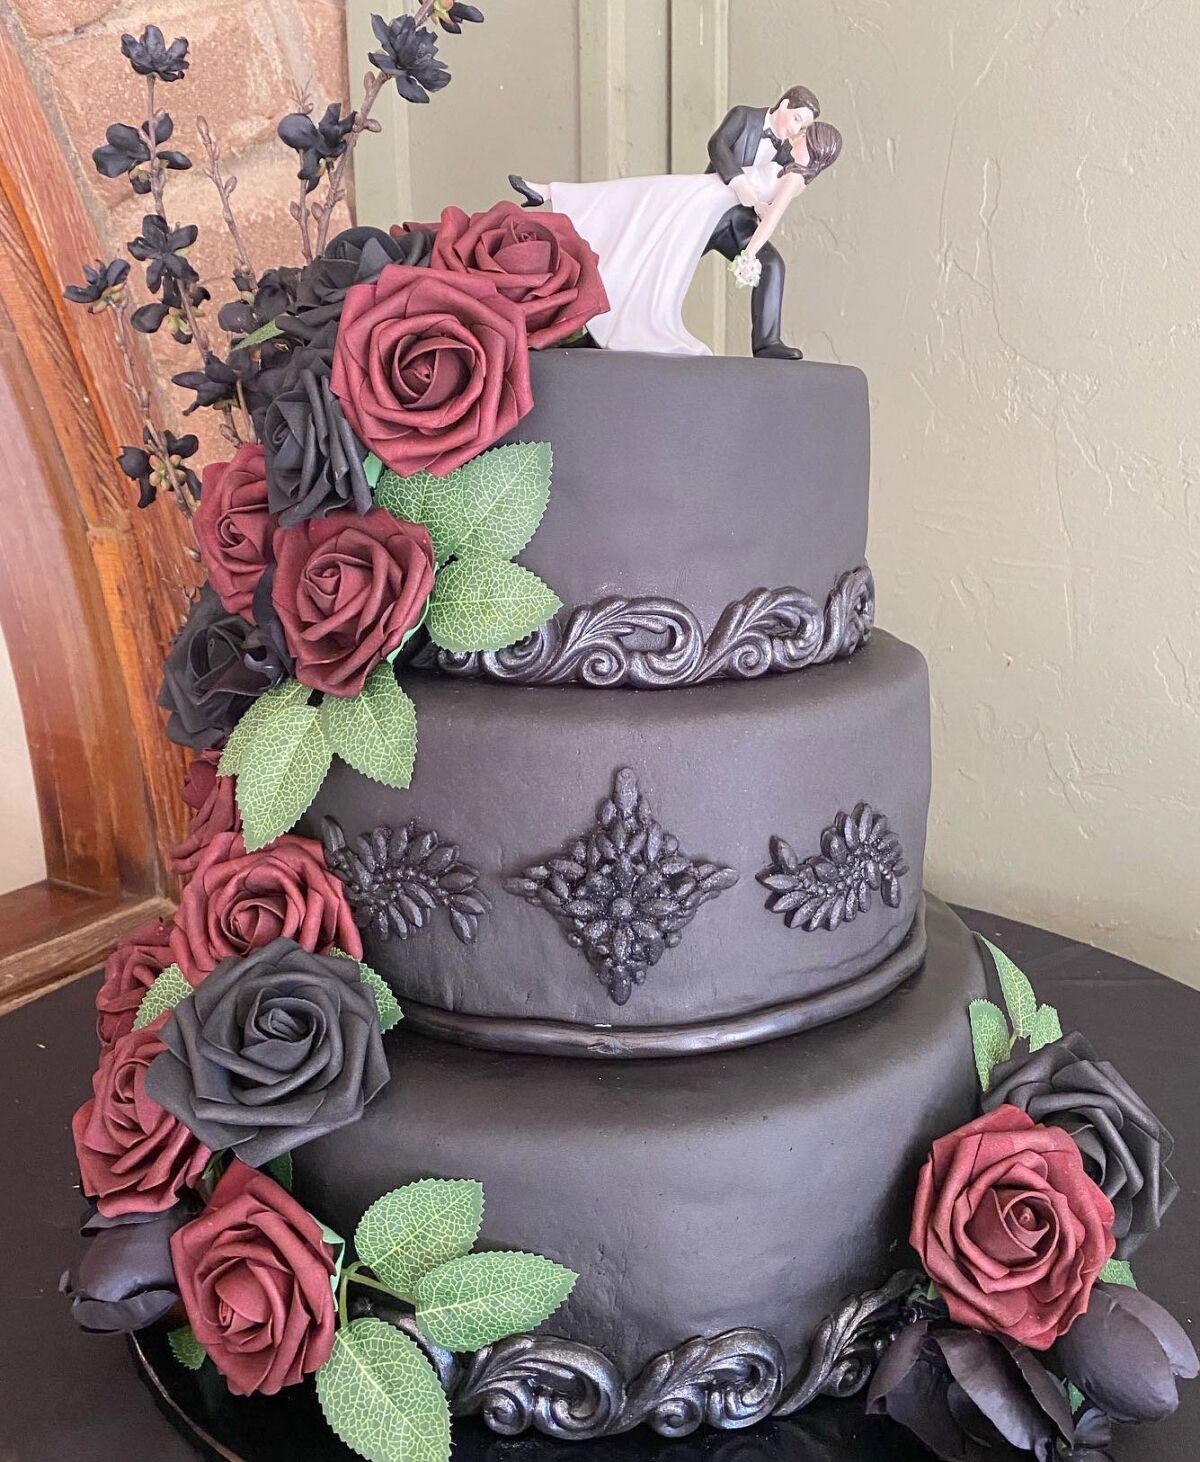 This cake was made to reflect the Wears’ Victorian/Sleepy Hollow meets a Southern-style fall festival wedding theme.